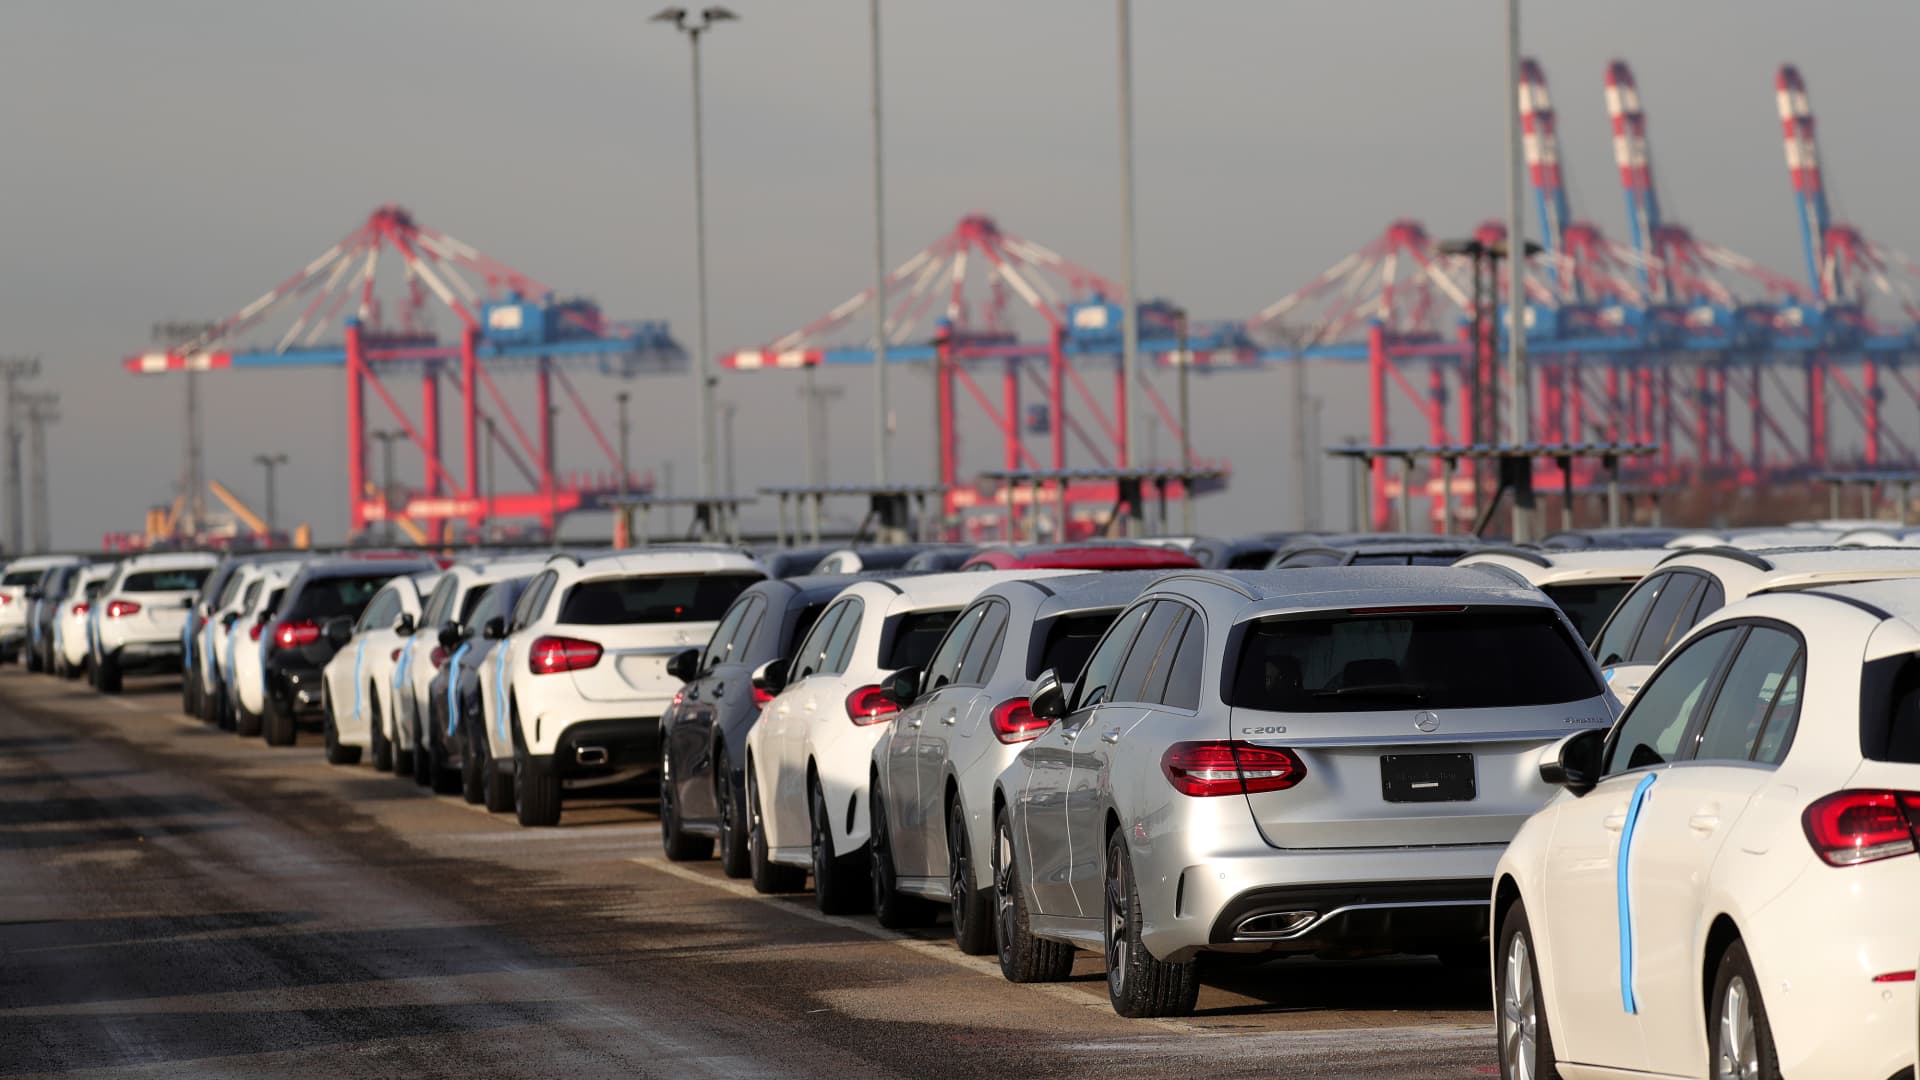 From Teslas to BMWs, cars pile up on land and sea in a German port